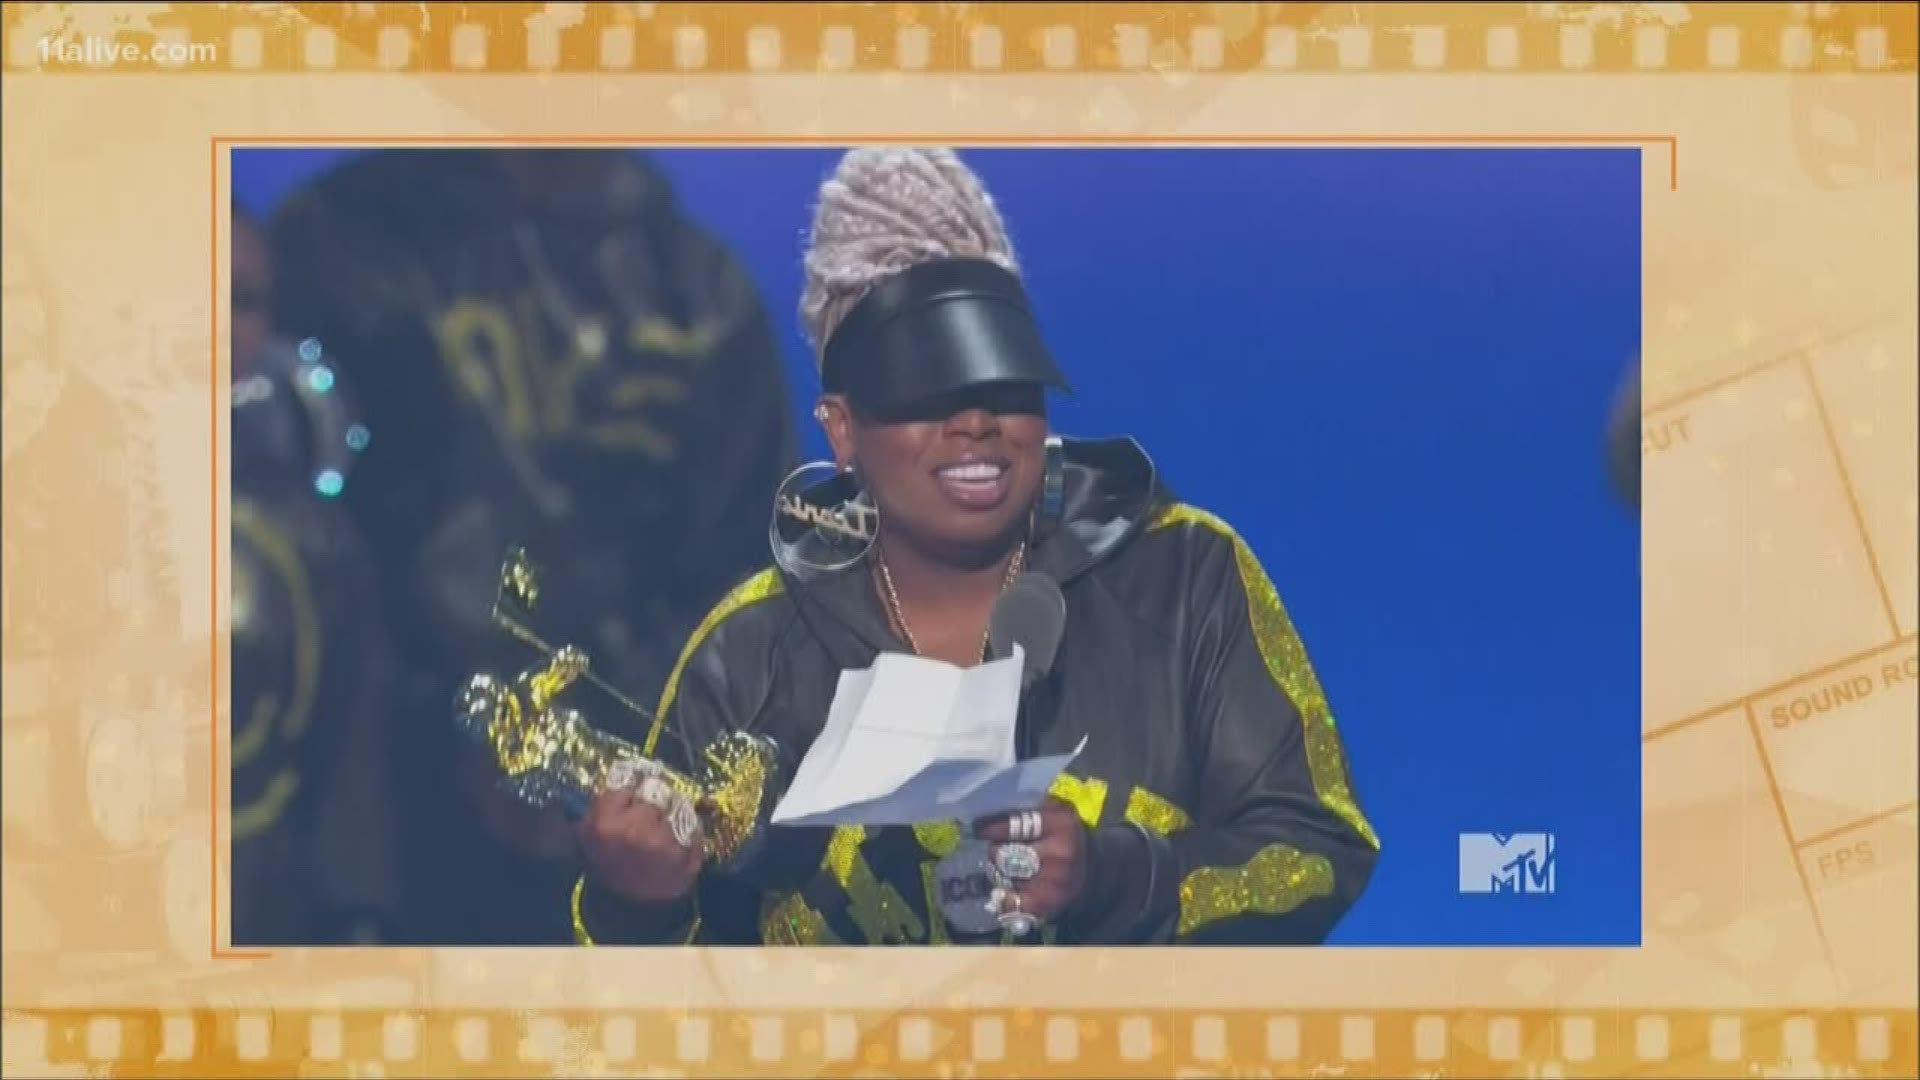 2019 Vma Awards Missy Elliot Honored With Video Vanguard